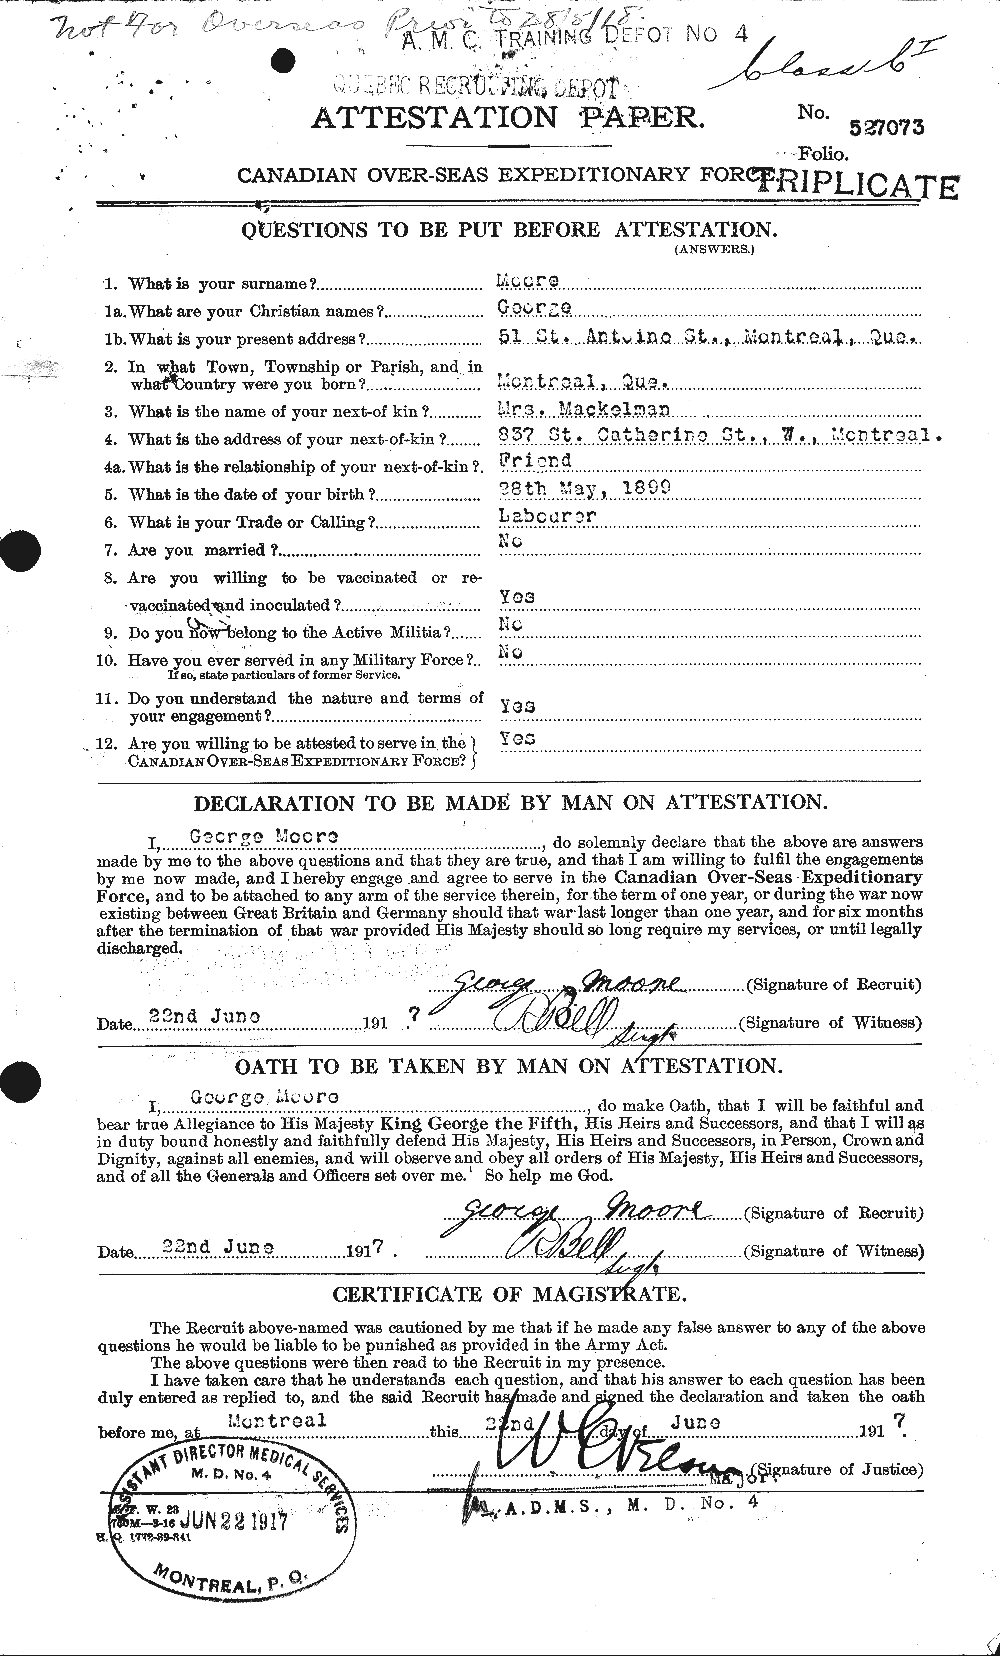 Personnel Records of the First World War - CEF 509389a